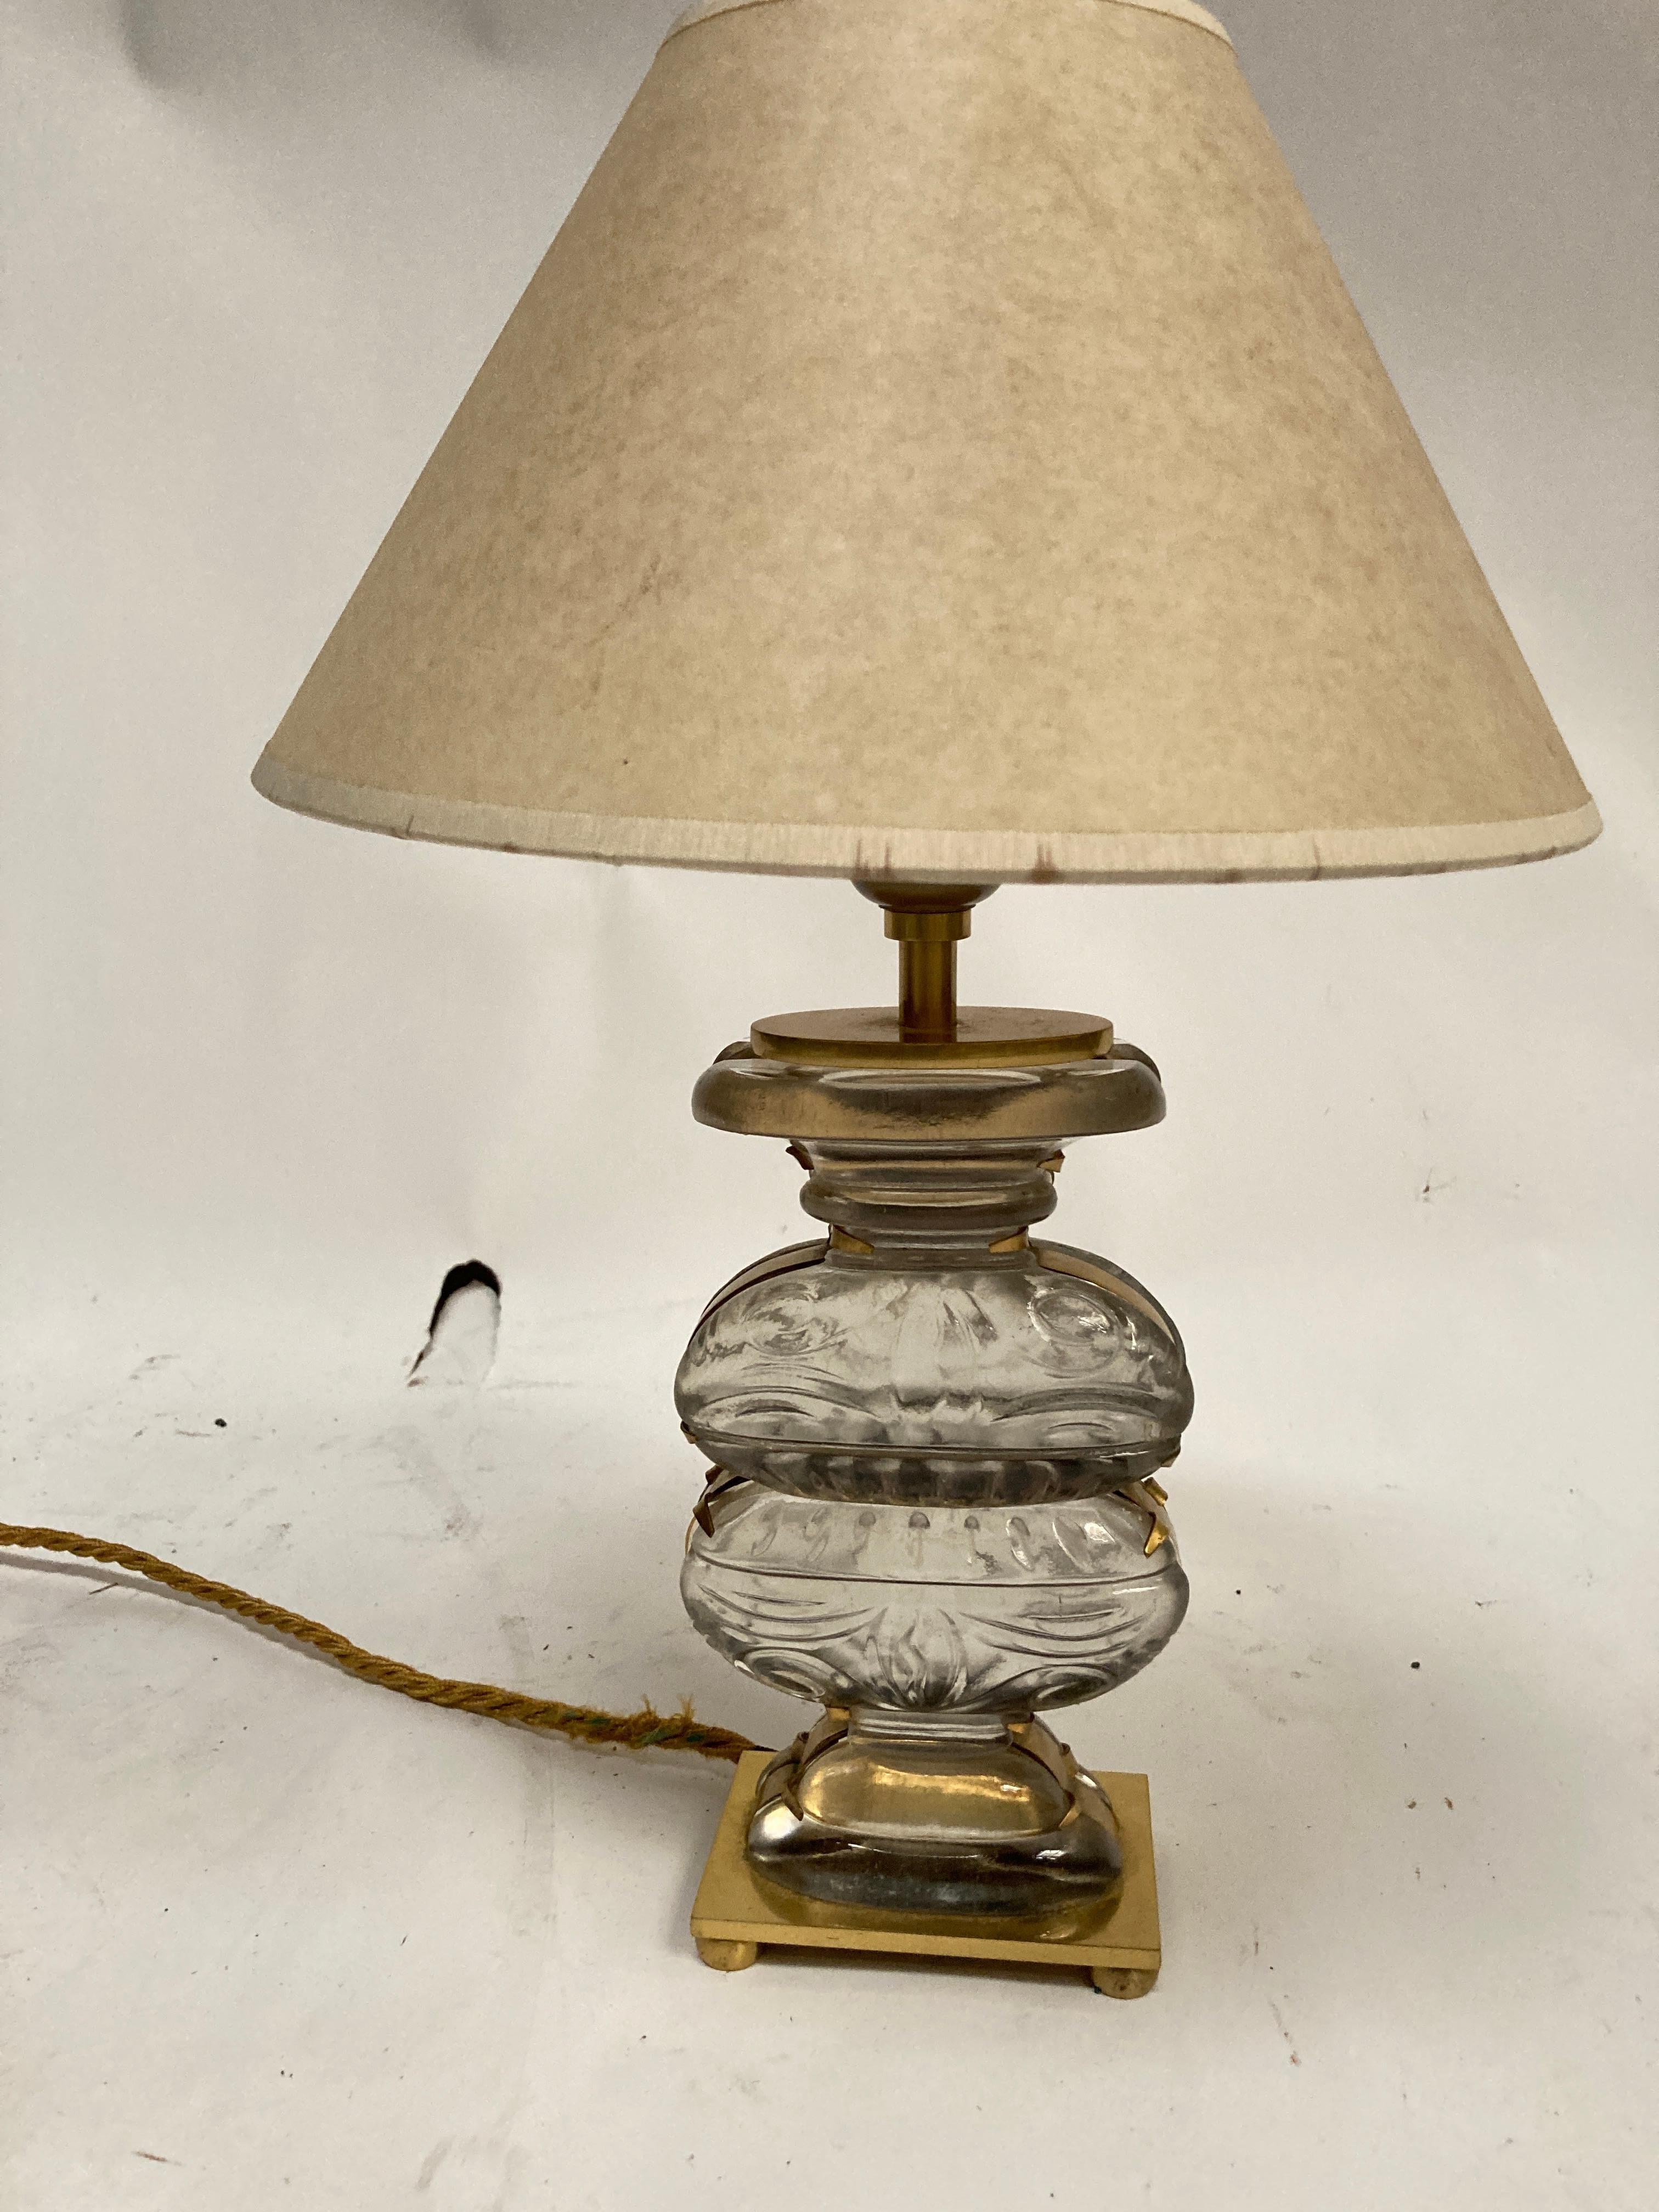 Very pretty table lamp 
Glass and brass
Circa 1960's
Dimensions given without shade
No shade included